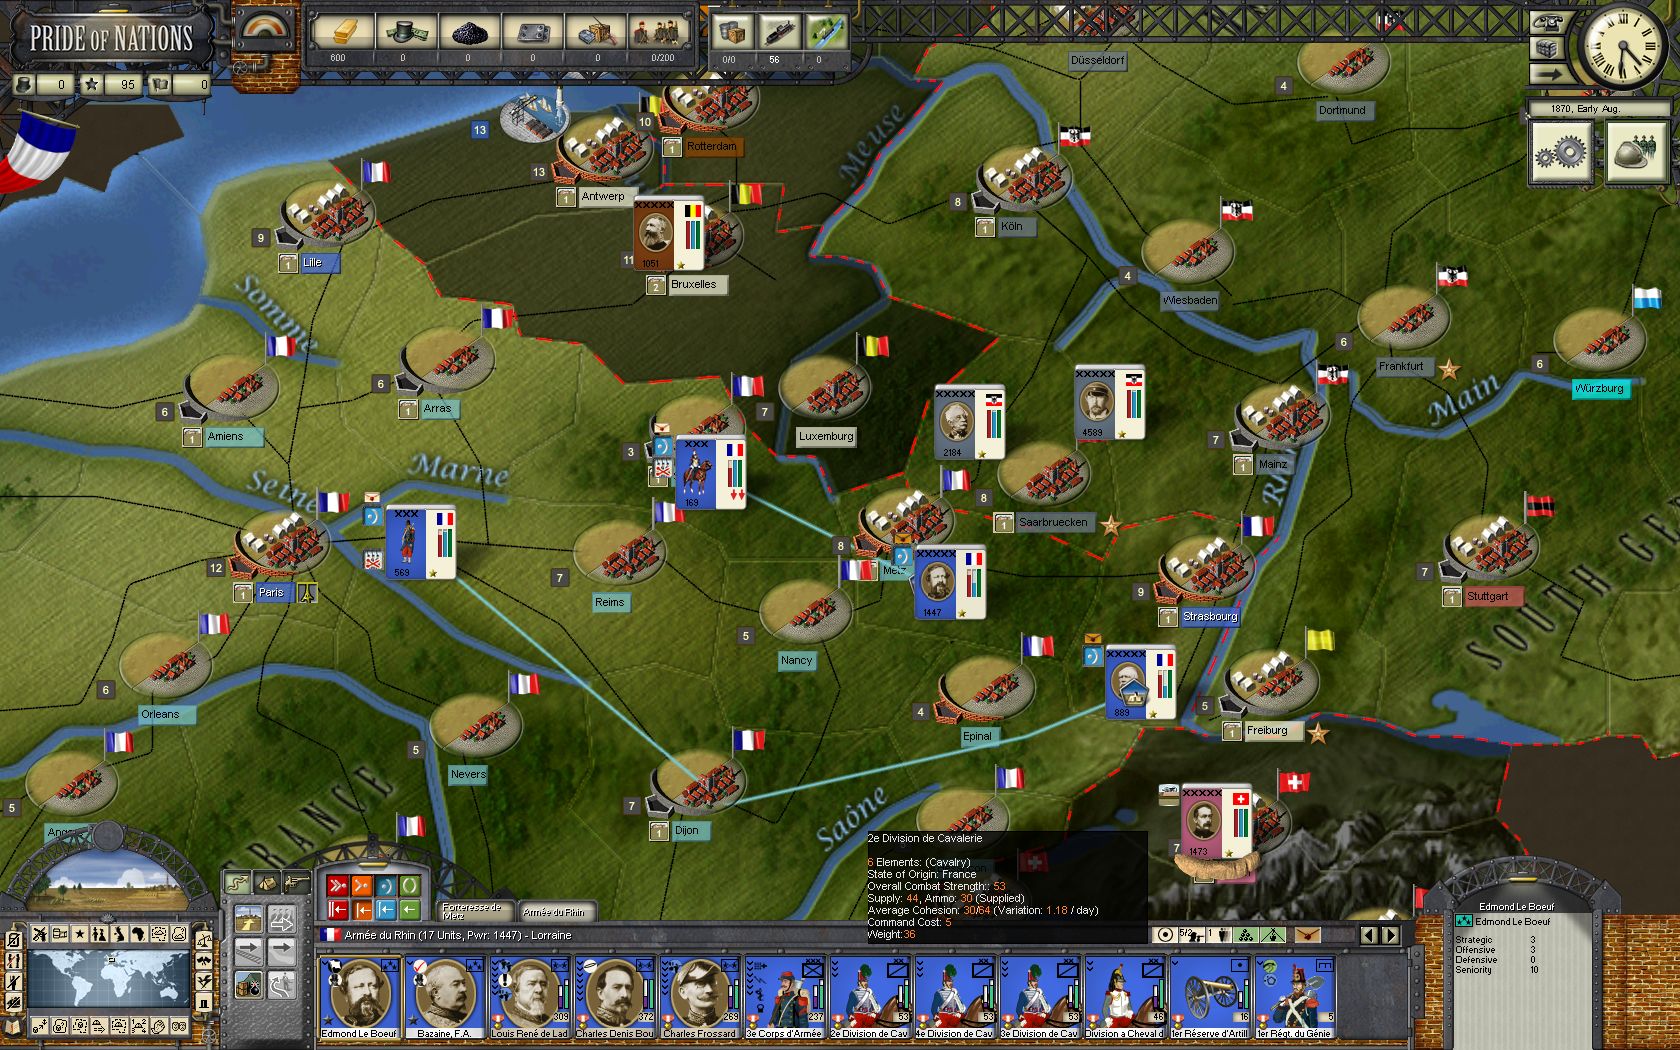 Pride of Nations: The Franco-Prussian War 1870 Featured Screenshot #1